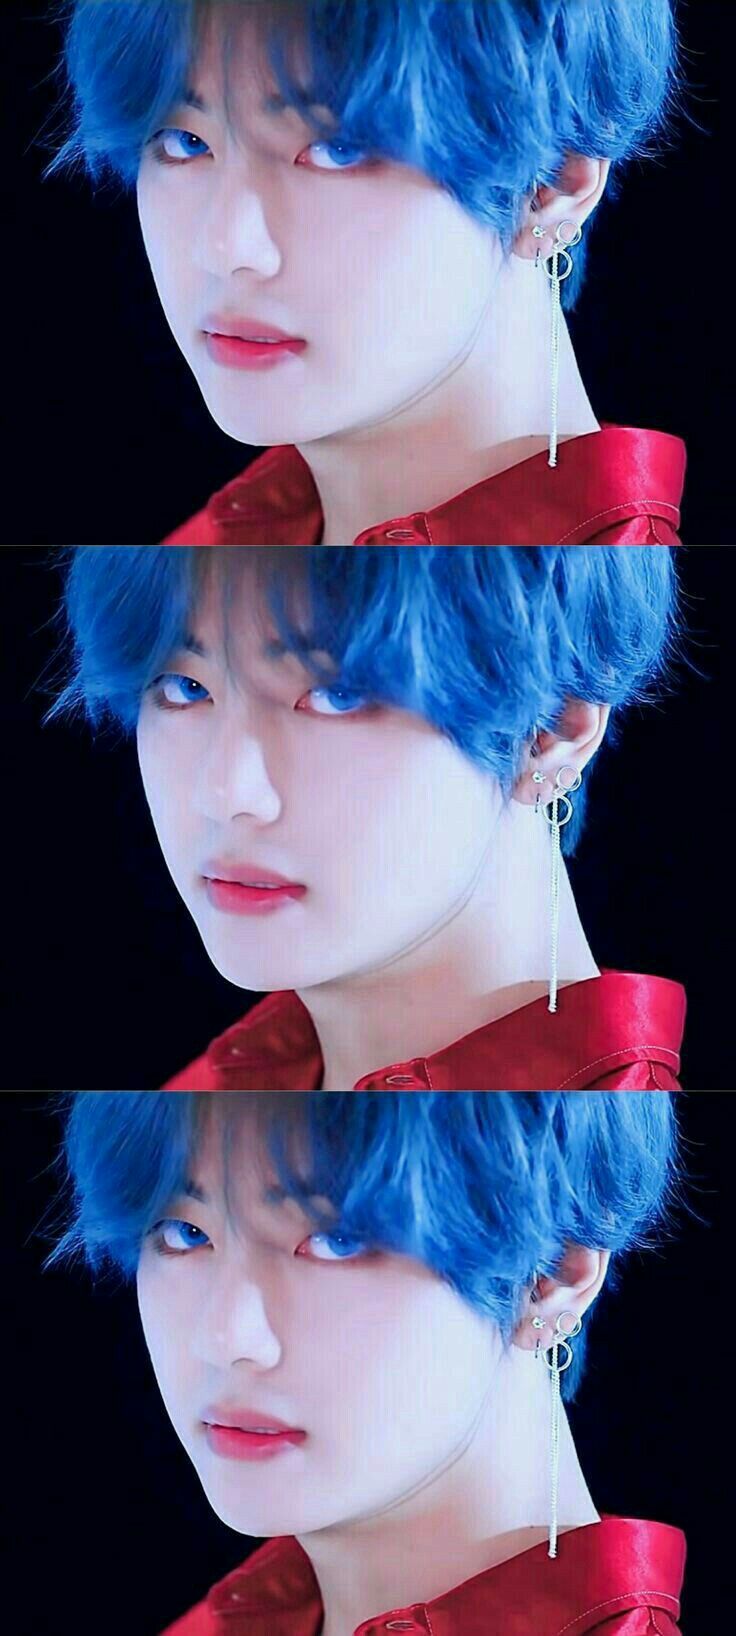 BTS V News on Twitter 1 BTS V Taehyung had blue hair for the first time  during BTSs Boy with Luv era when they gained even more international  fans Many new ARMY